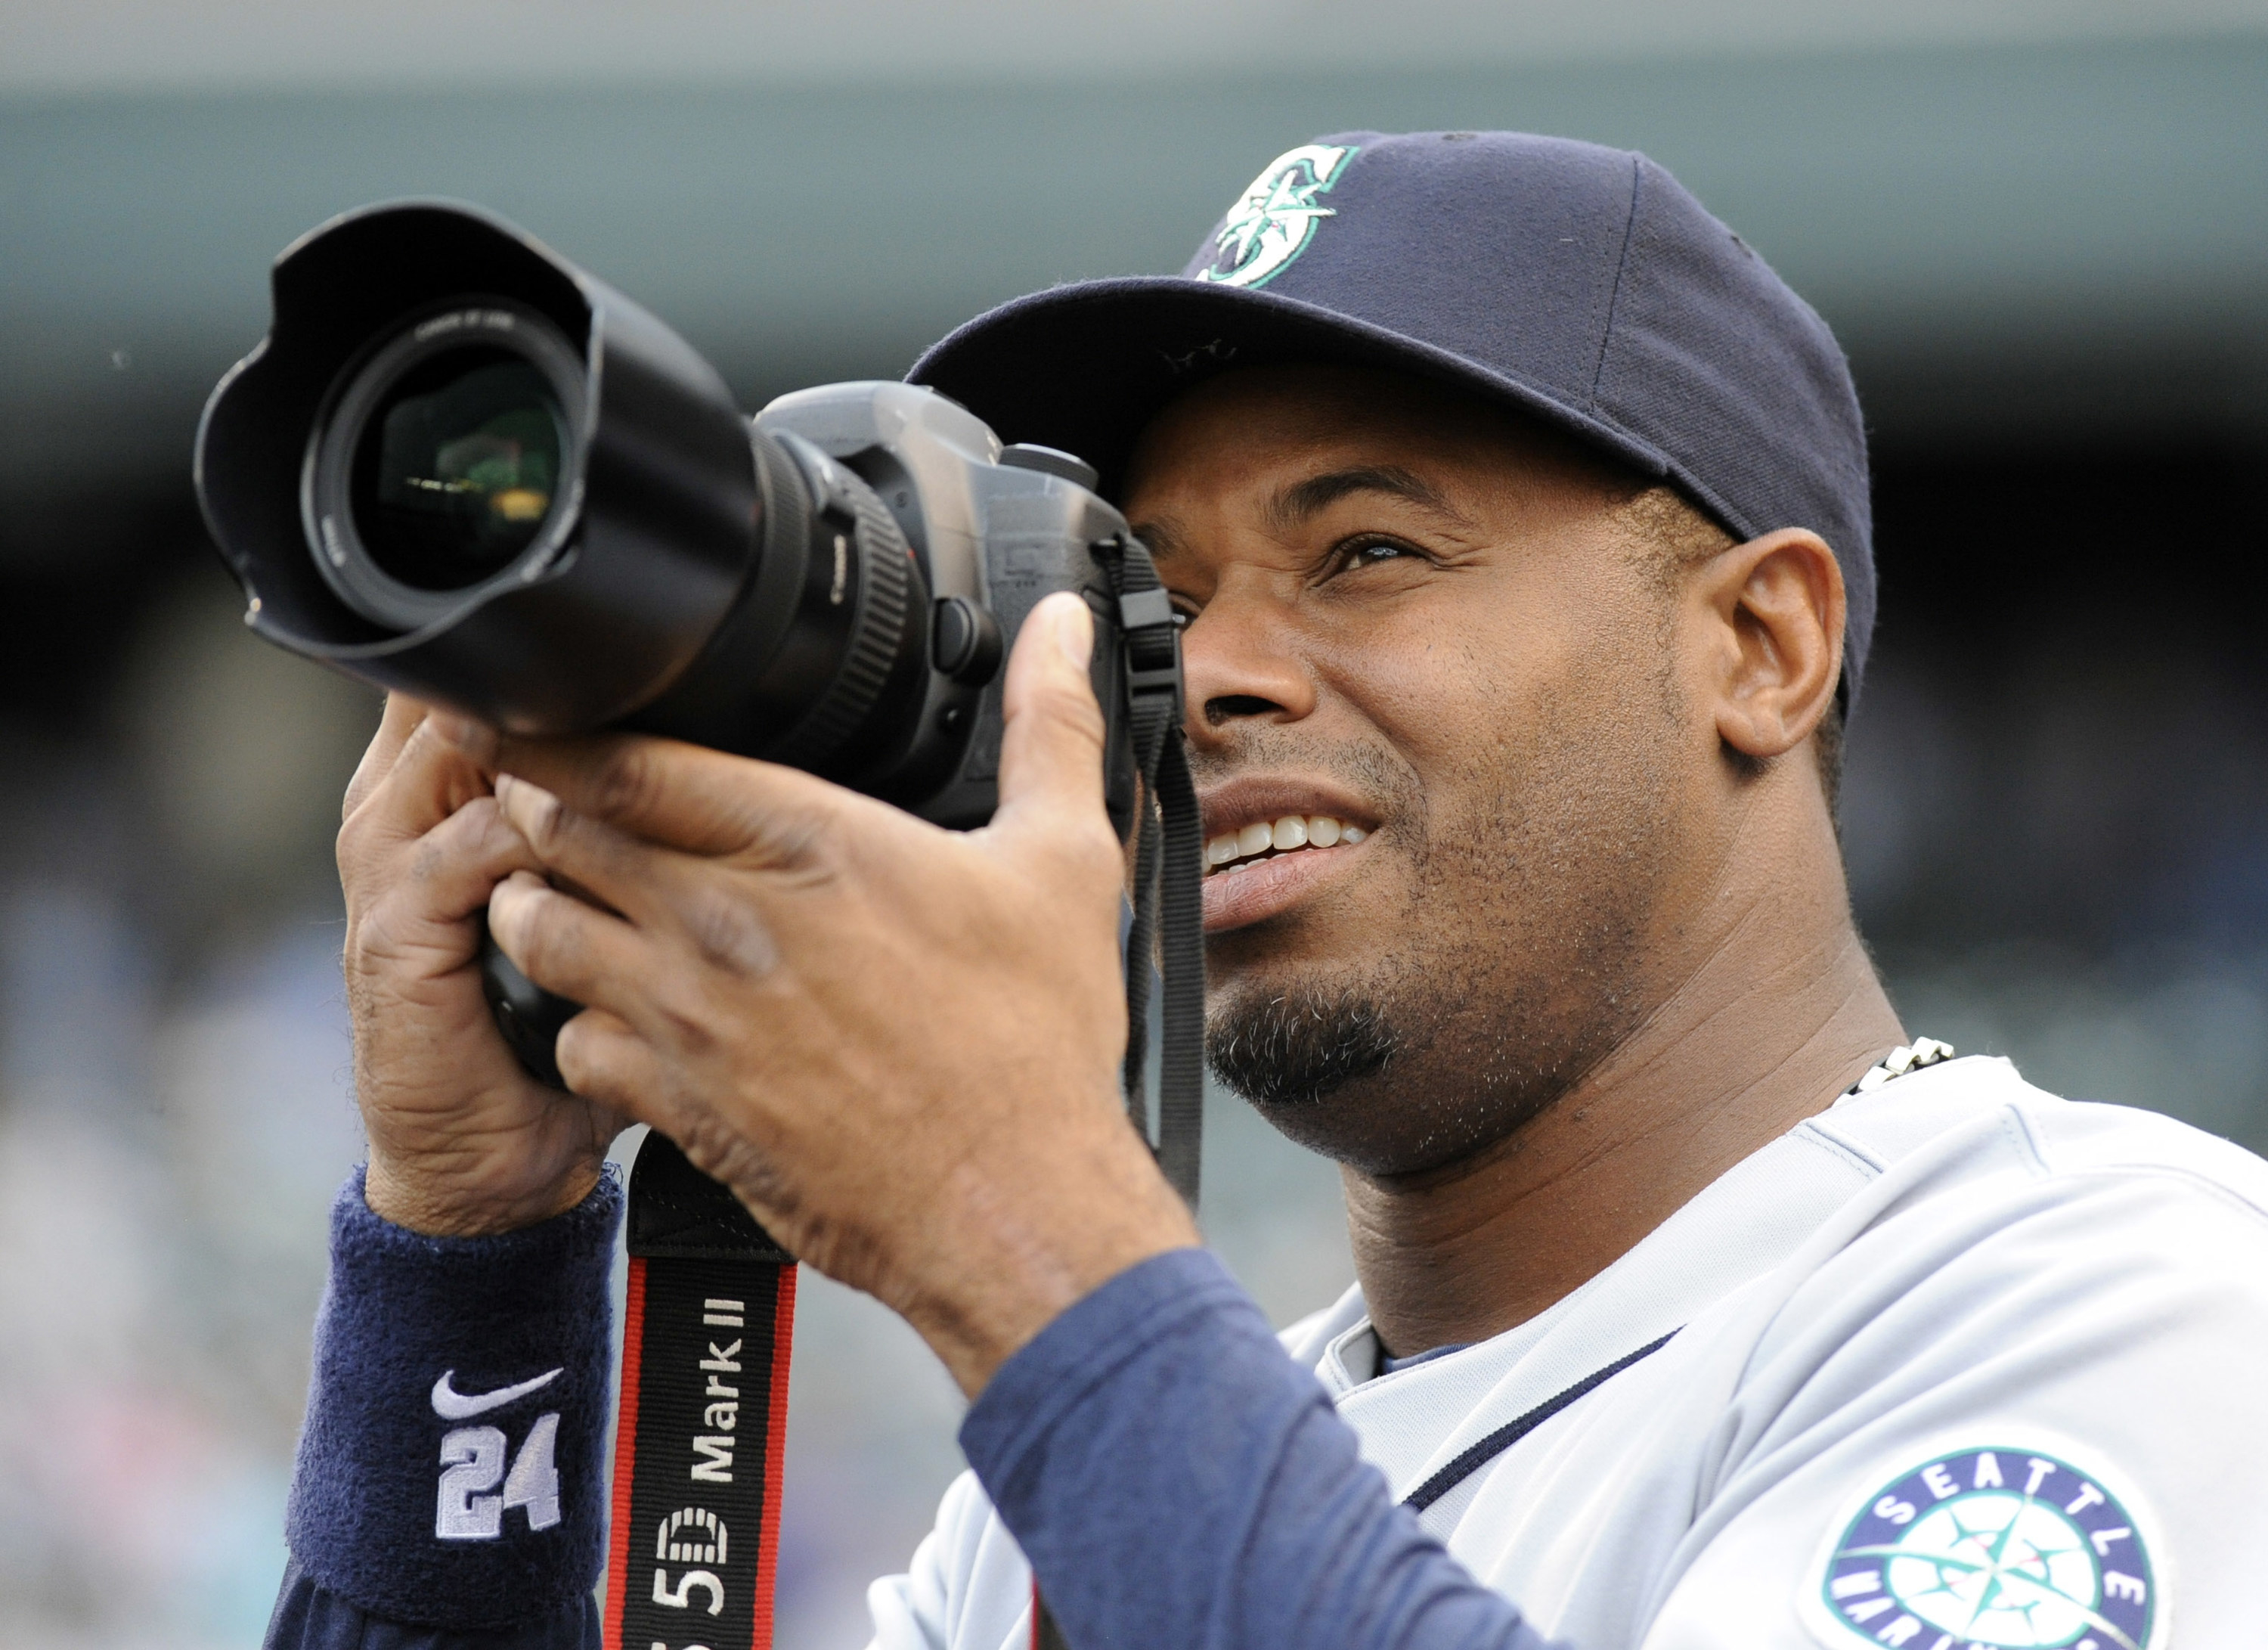 eattle Mariner&#x27;s superstar, Ken Griffey, borrowed a photographer&#x27;s camera and took a few pictures from the dugout just before they played the Colorado Rockies at Coors Field Friday evening.